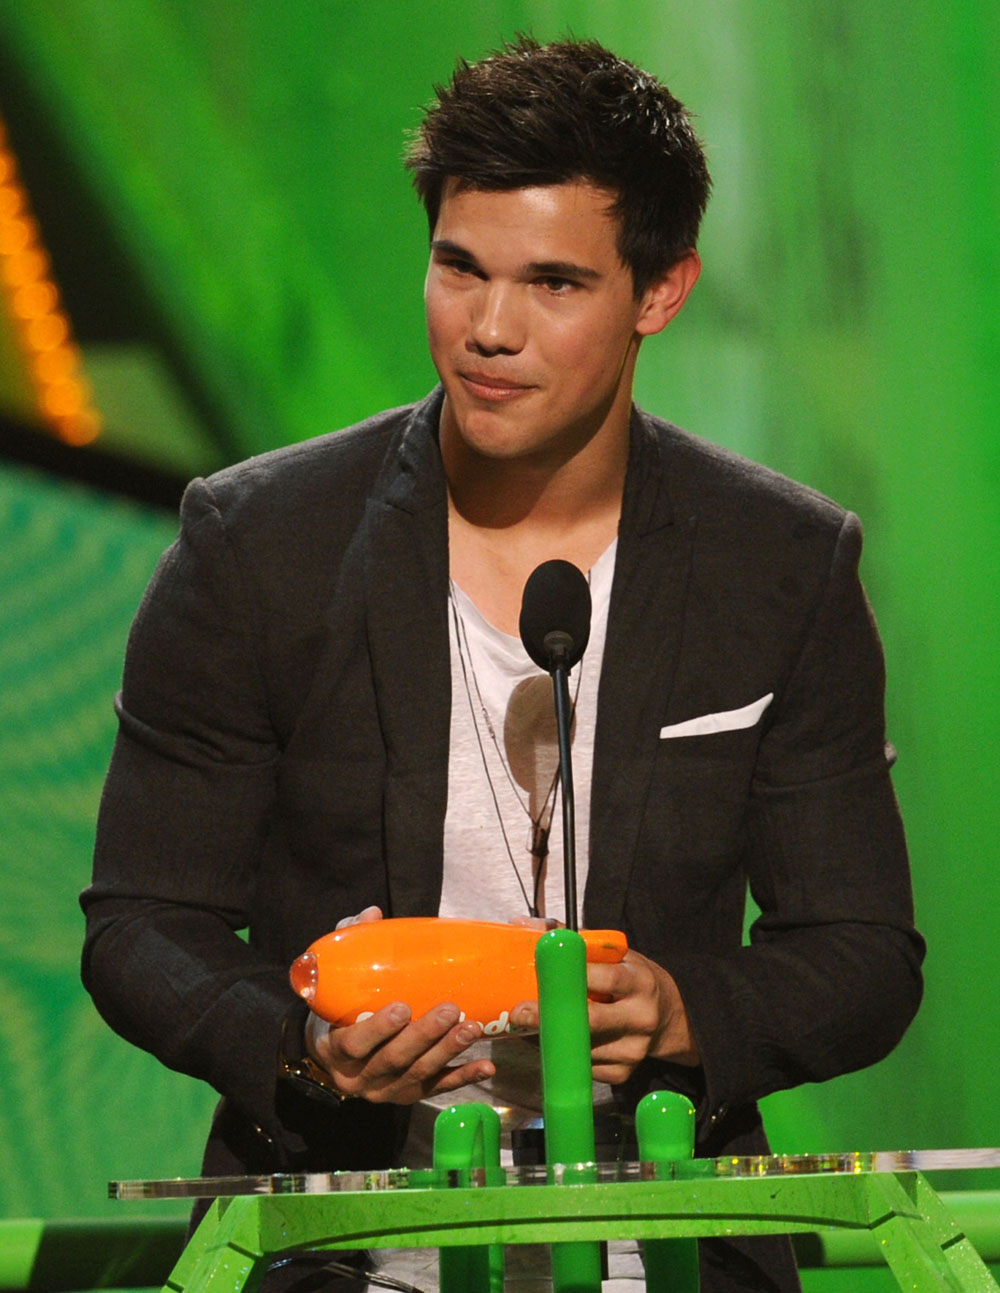 Nickelodeon’s 23rd Annual Kids’ Choice Awards Get Serious with Winners